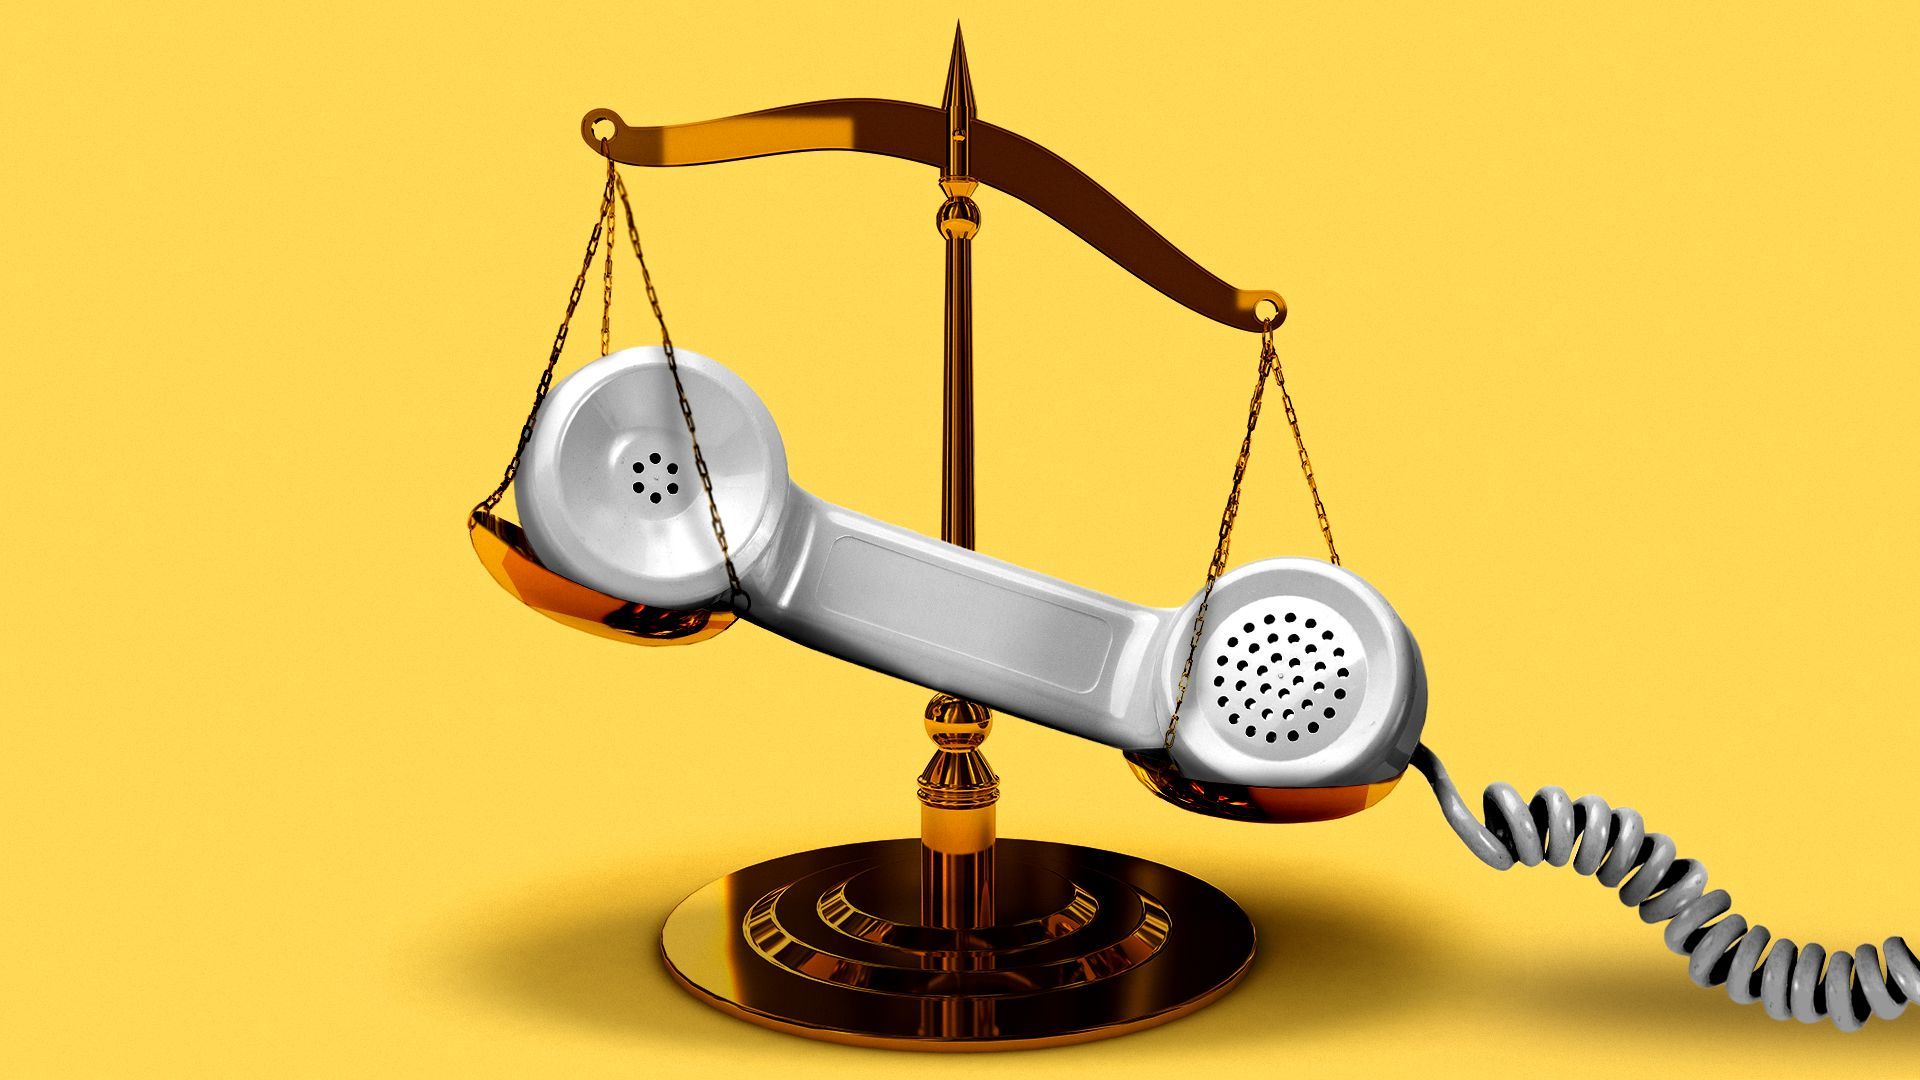 Illustration of a phone receiver placed in the two plates of justice scales